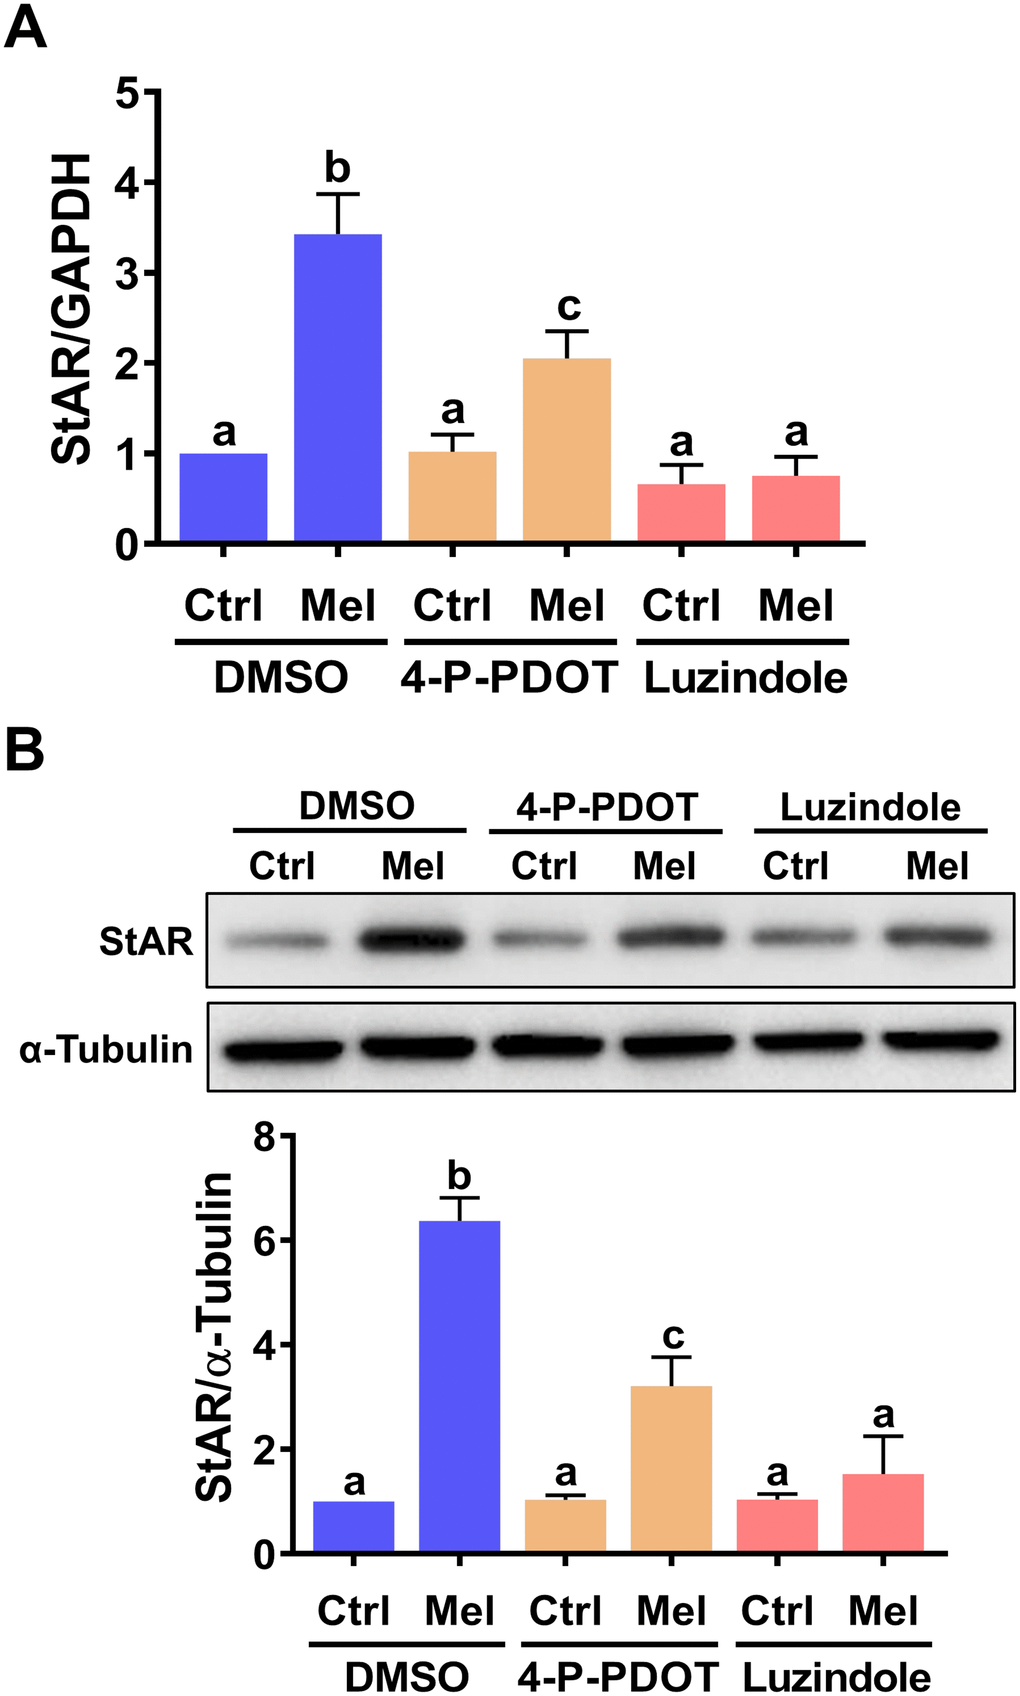 MT1 andMT2 melatonin receptors mediate melatonin-induced StAR expression in primary hGL cells. Cells were pre-treated with vehicle control (DMSO), 10 μM 4-P-PDOT, or 10 μM luzindole for 30 min and then exposed to 500 μM melatonin for 24 h. StAR mRNA (A) and protein (B) levels were examined by RT-qPCR and western blot, respectively. Results are expressed as the mean ± SEM of 4 independent experiments. Values without a common letter are significantly different (p 